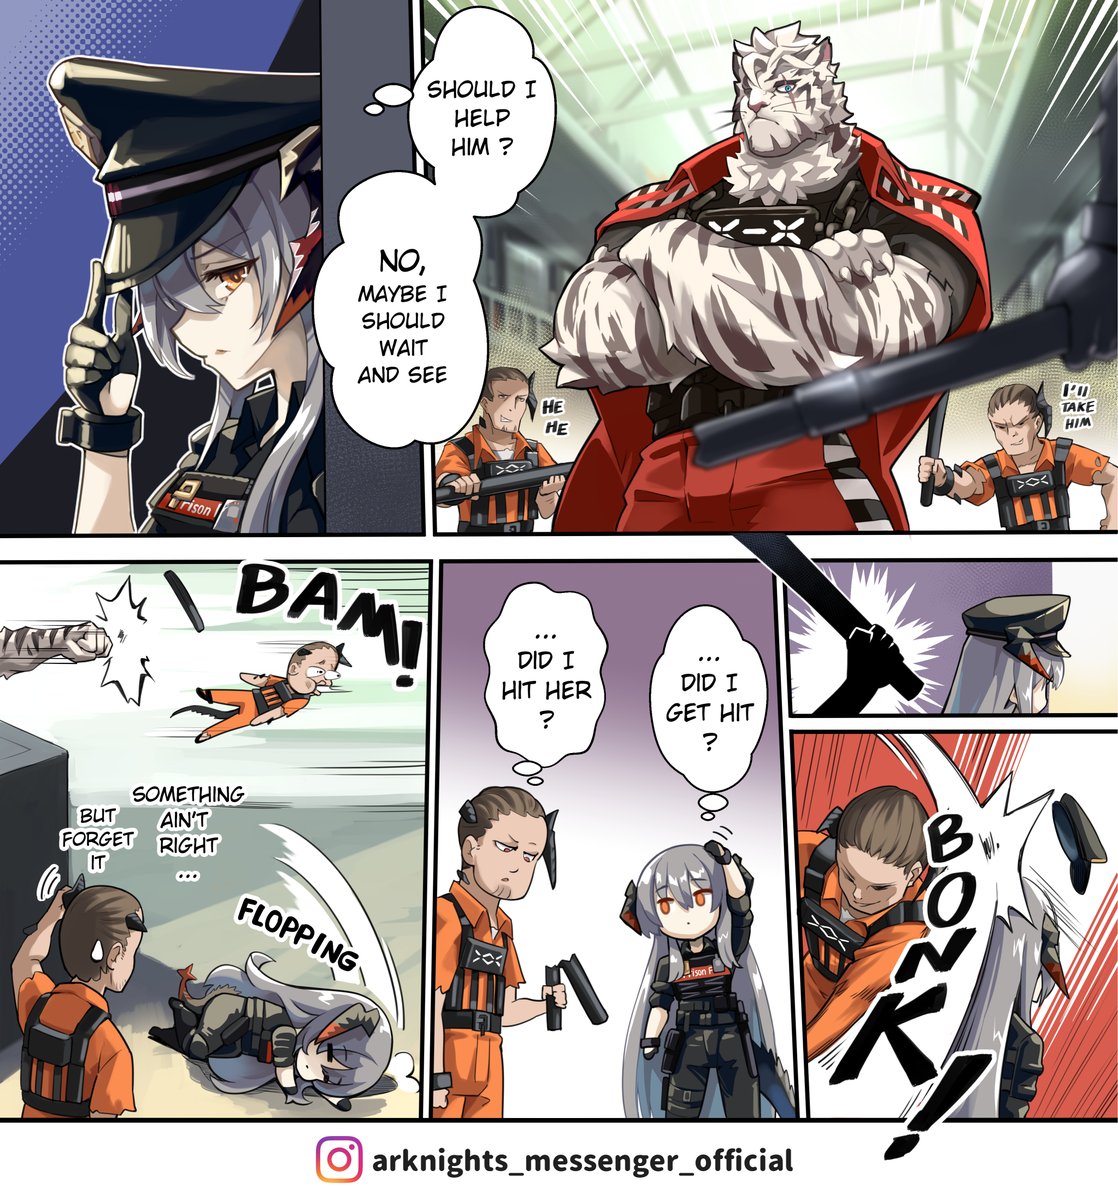 Get hit, or not get hit, that is a question.🤔
Comic on arknights_messenger_official https://t.co/or09pdYrHX
#Arknights #明日方舟 #アークナイツ #명일방주 #Yostar 